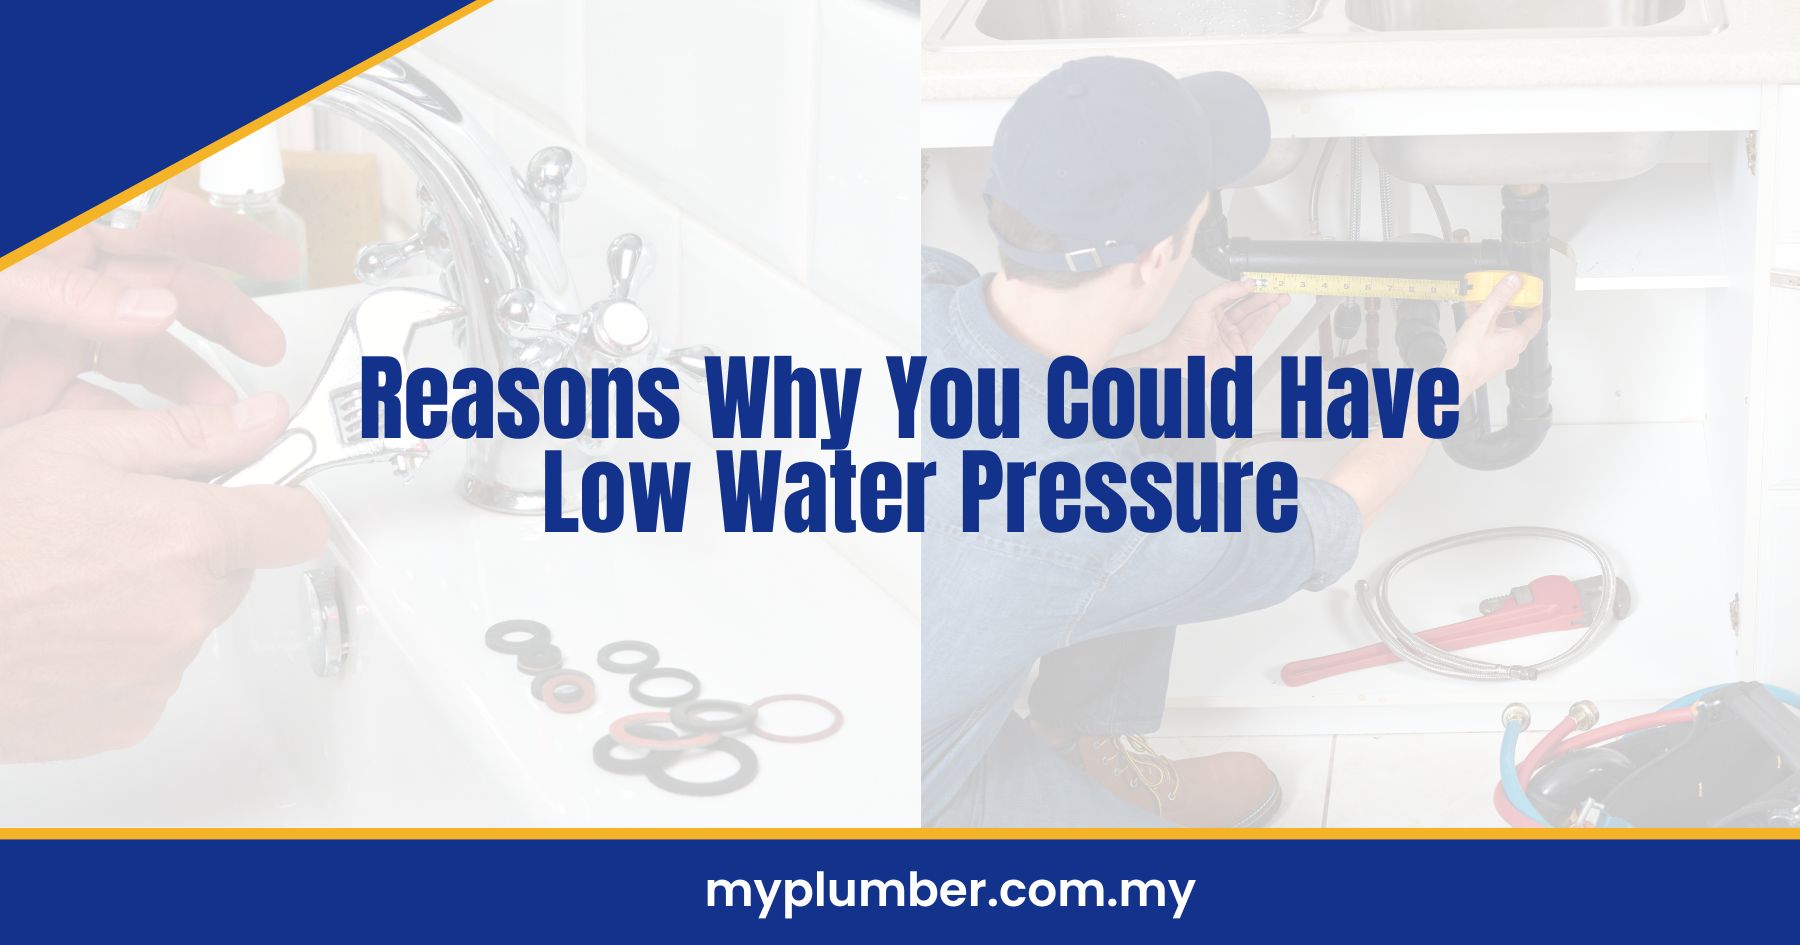 Reasons Why You Could Have Low Water Pressure